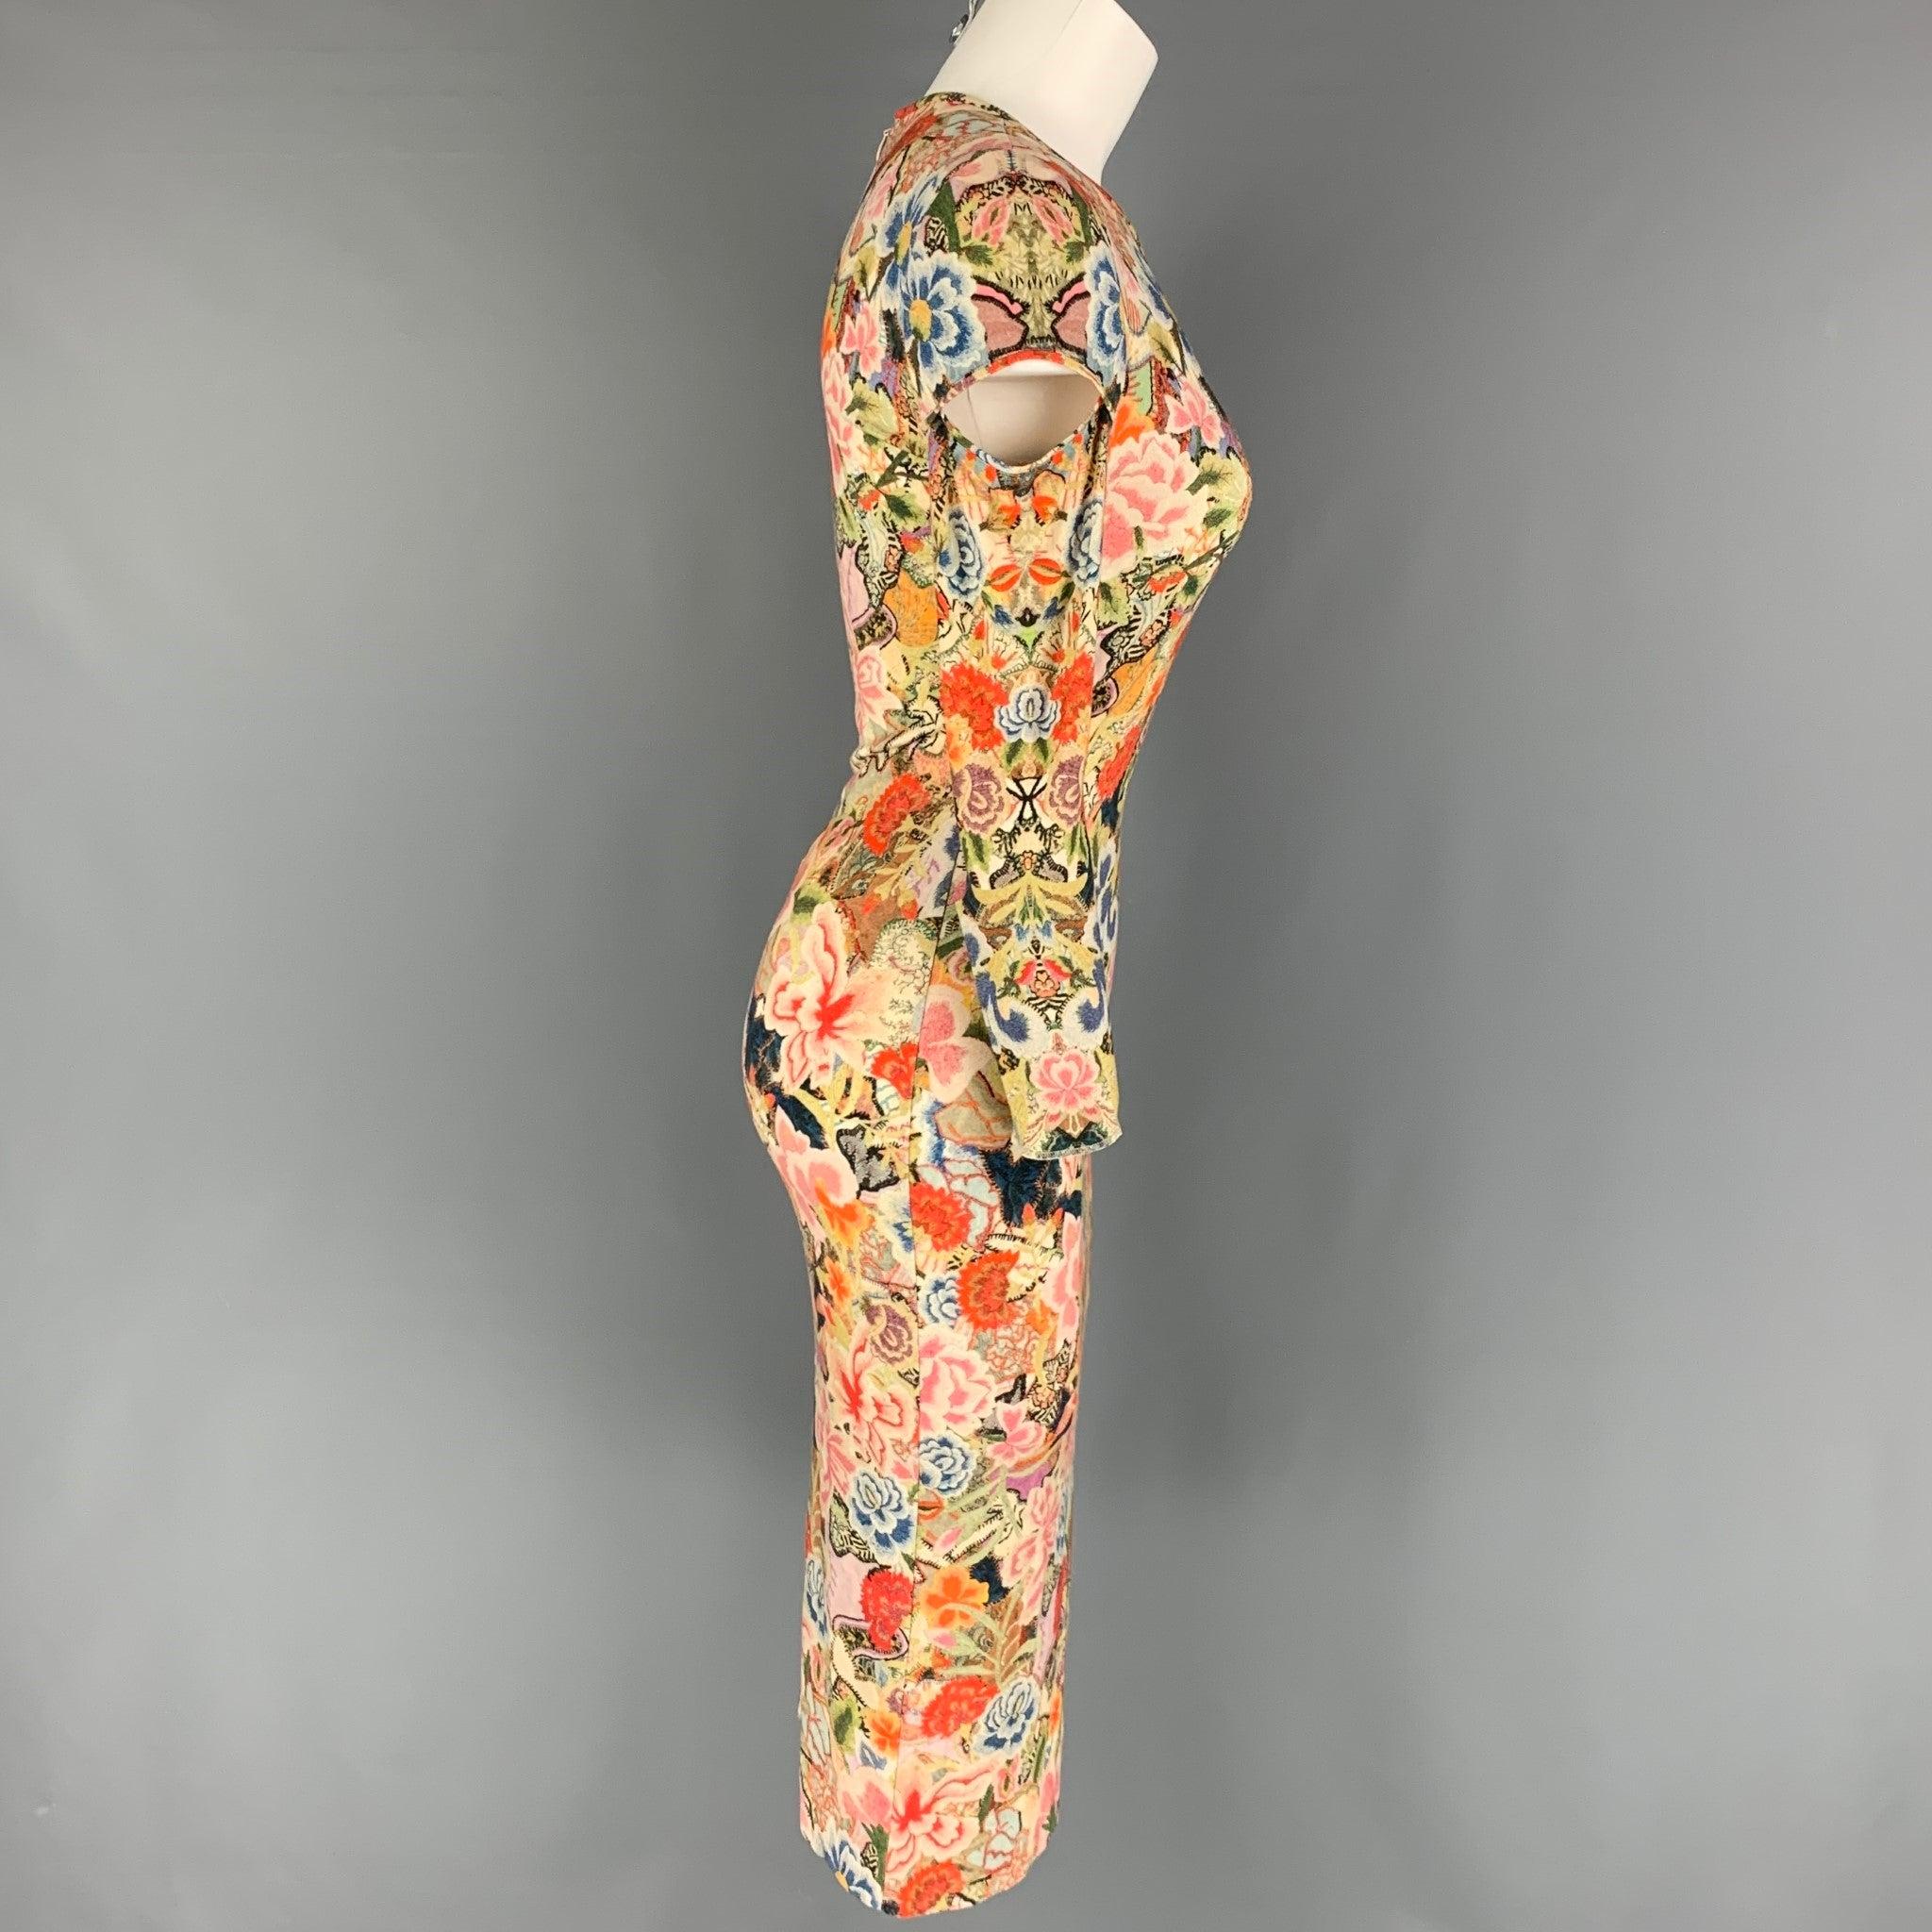 ALEXANDER McQUEEN dress comes in a multi-color abstract floral rayon blend featuring shoulder cut-out details, crew-neck, and a back zip up closure.
Made in Italy. Very Good
Pre-Owned Condition. 

Marked:   40  

Measurements: 
 
Shoulder: 15 inches